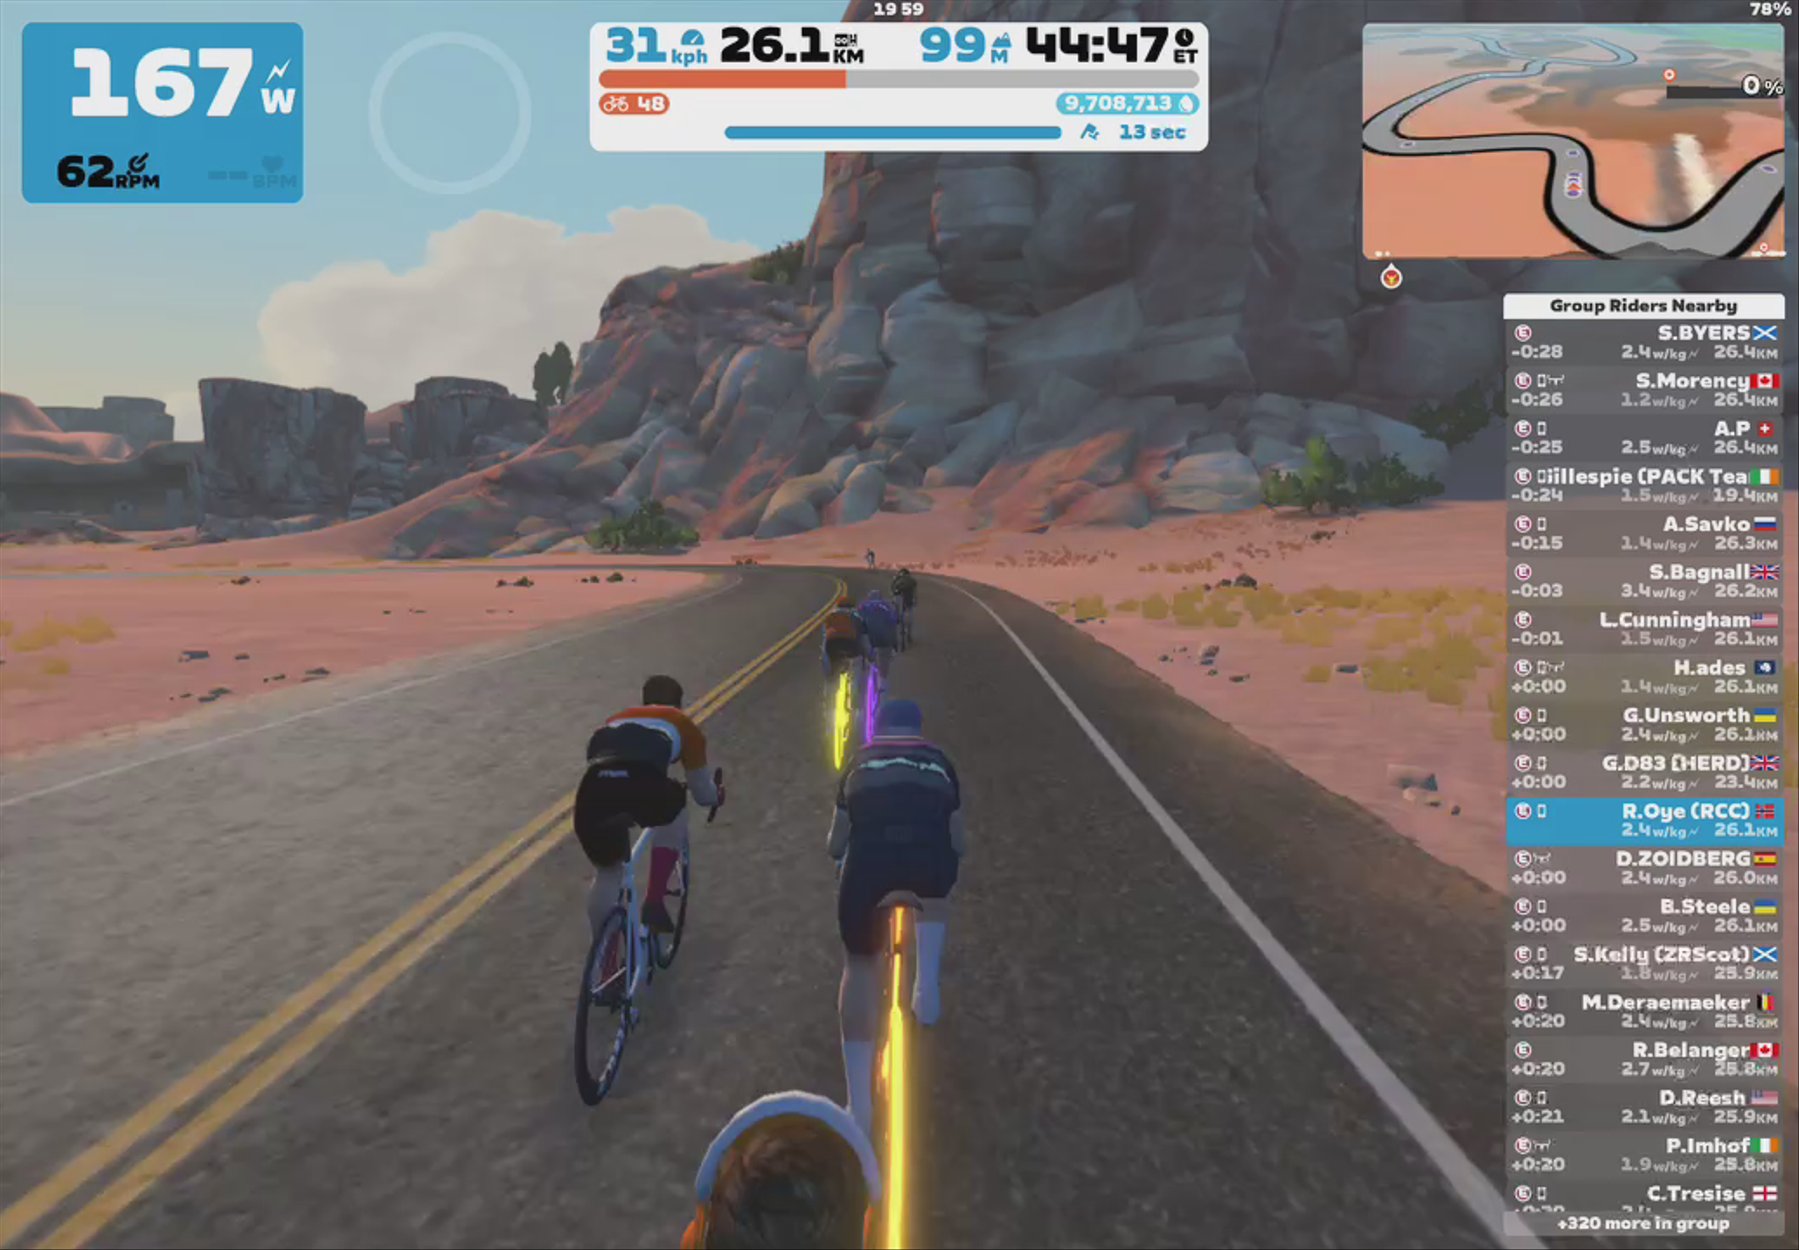 Zwift - Group Ride: The XP Express on Watopia's Waistband in Watopia